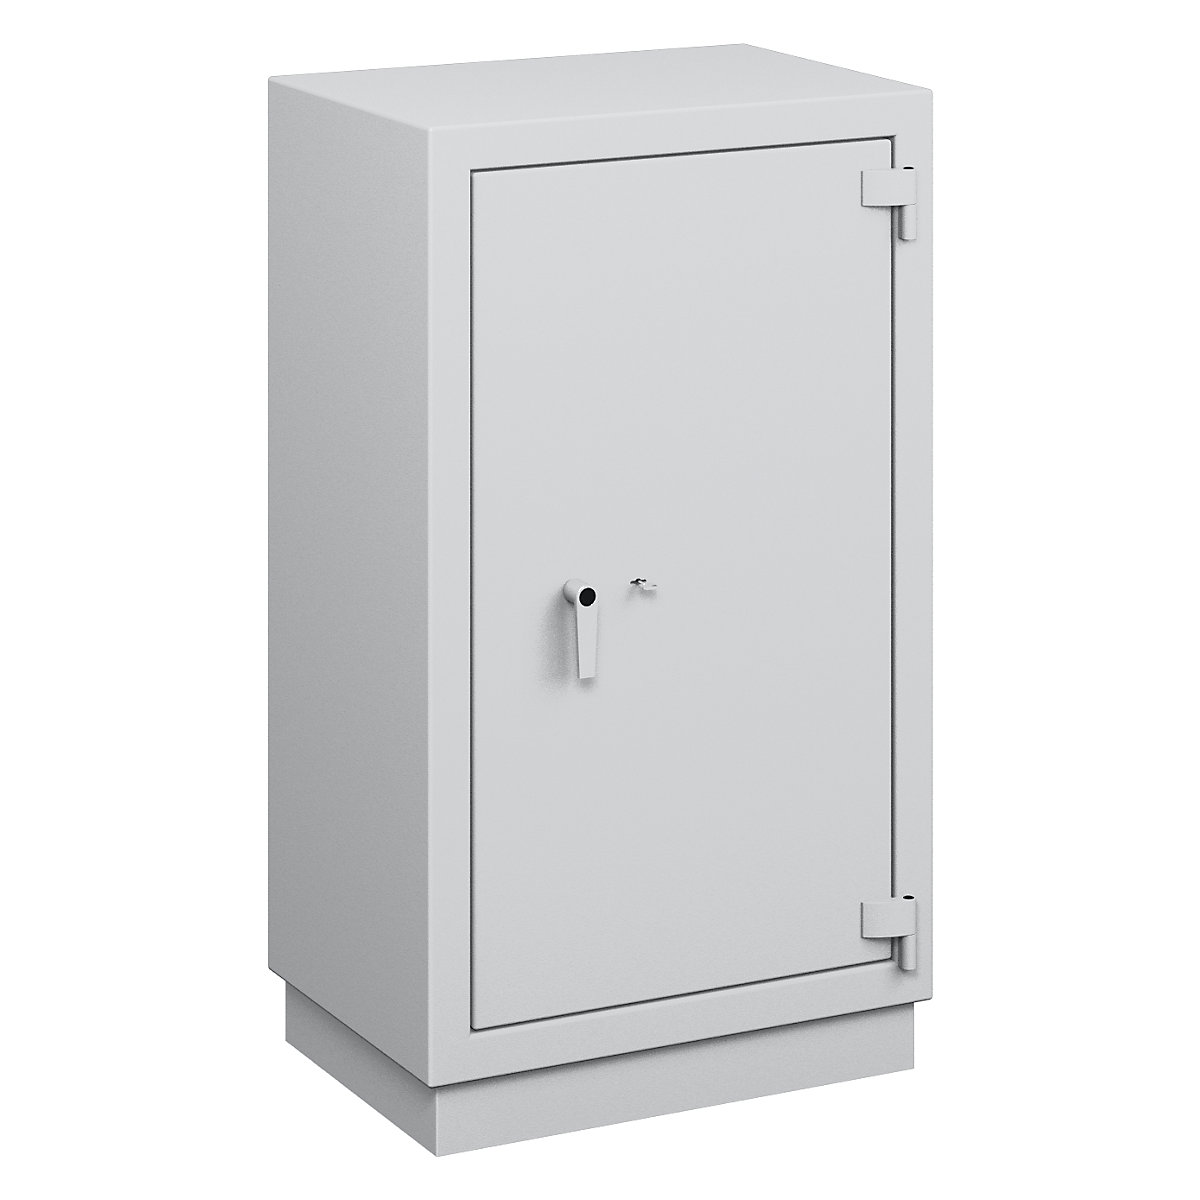 Fire resistant safety cabinet, VDMA B, S2, S 120 P, HxWxD 1400 x 794 x 560 mm-8